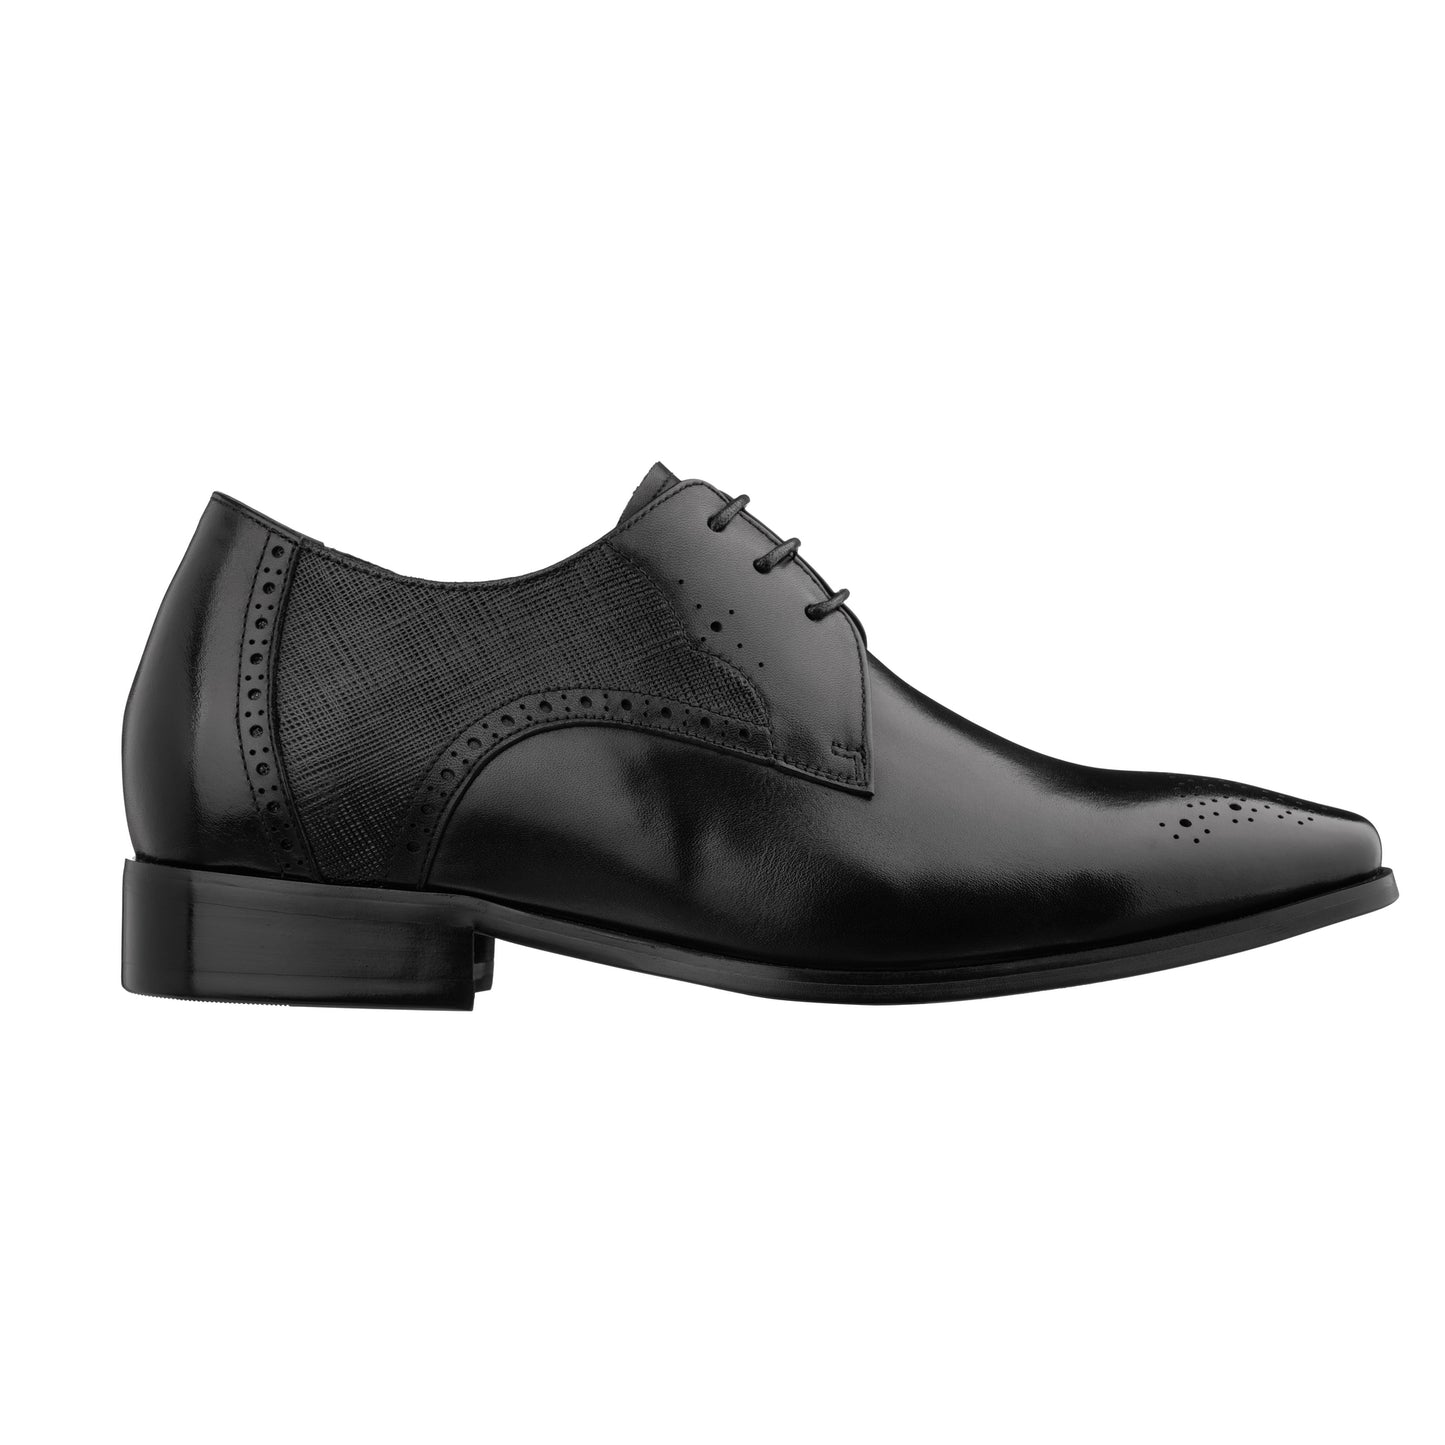 Elevator shoes height increase TOTO - Y6511 - 2.2 Inches Taller (Black) - Dress Oxford - Lightweight